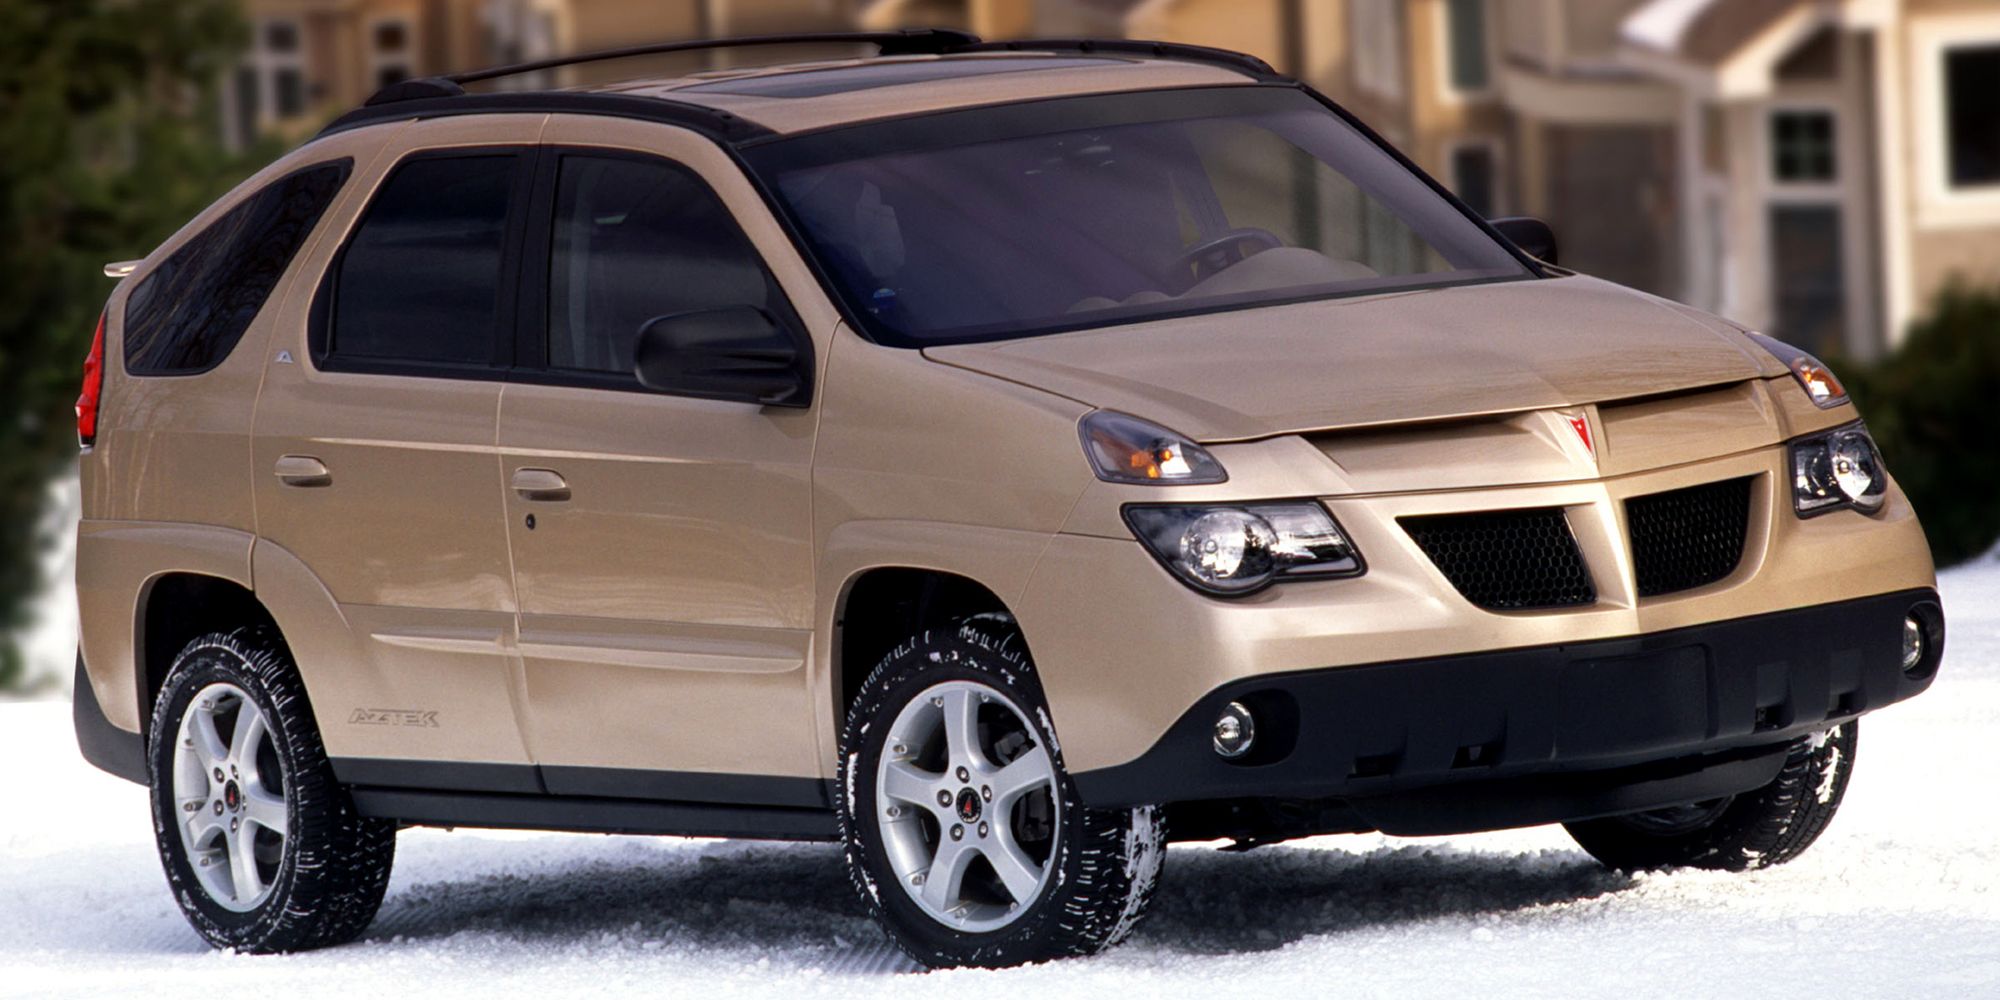 The front of the Aztek